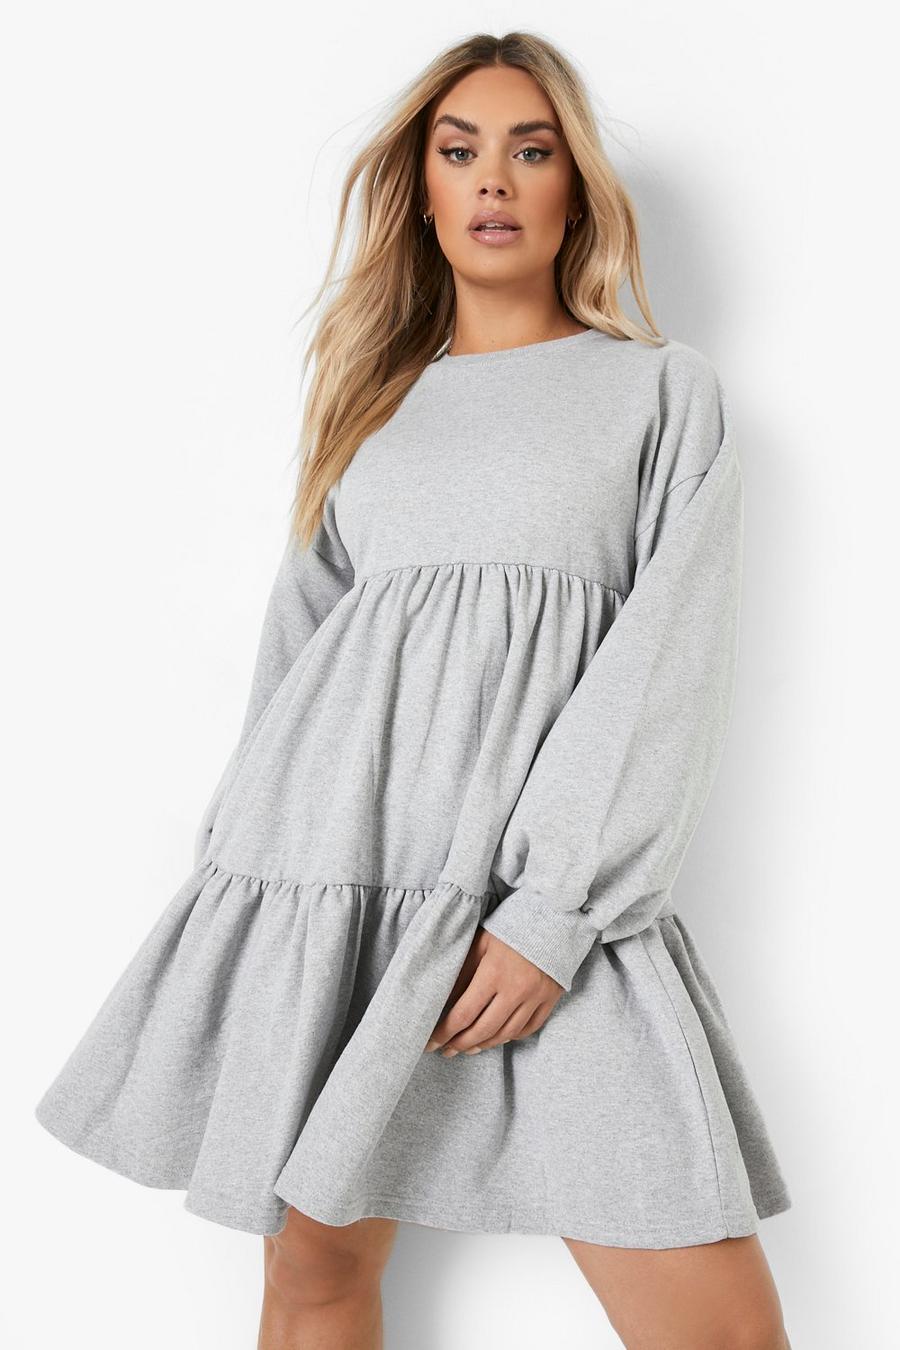 Grande taille - Robe sweat à volants, Grey marl image number 1